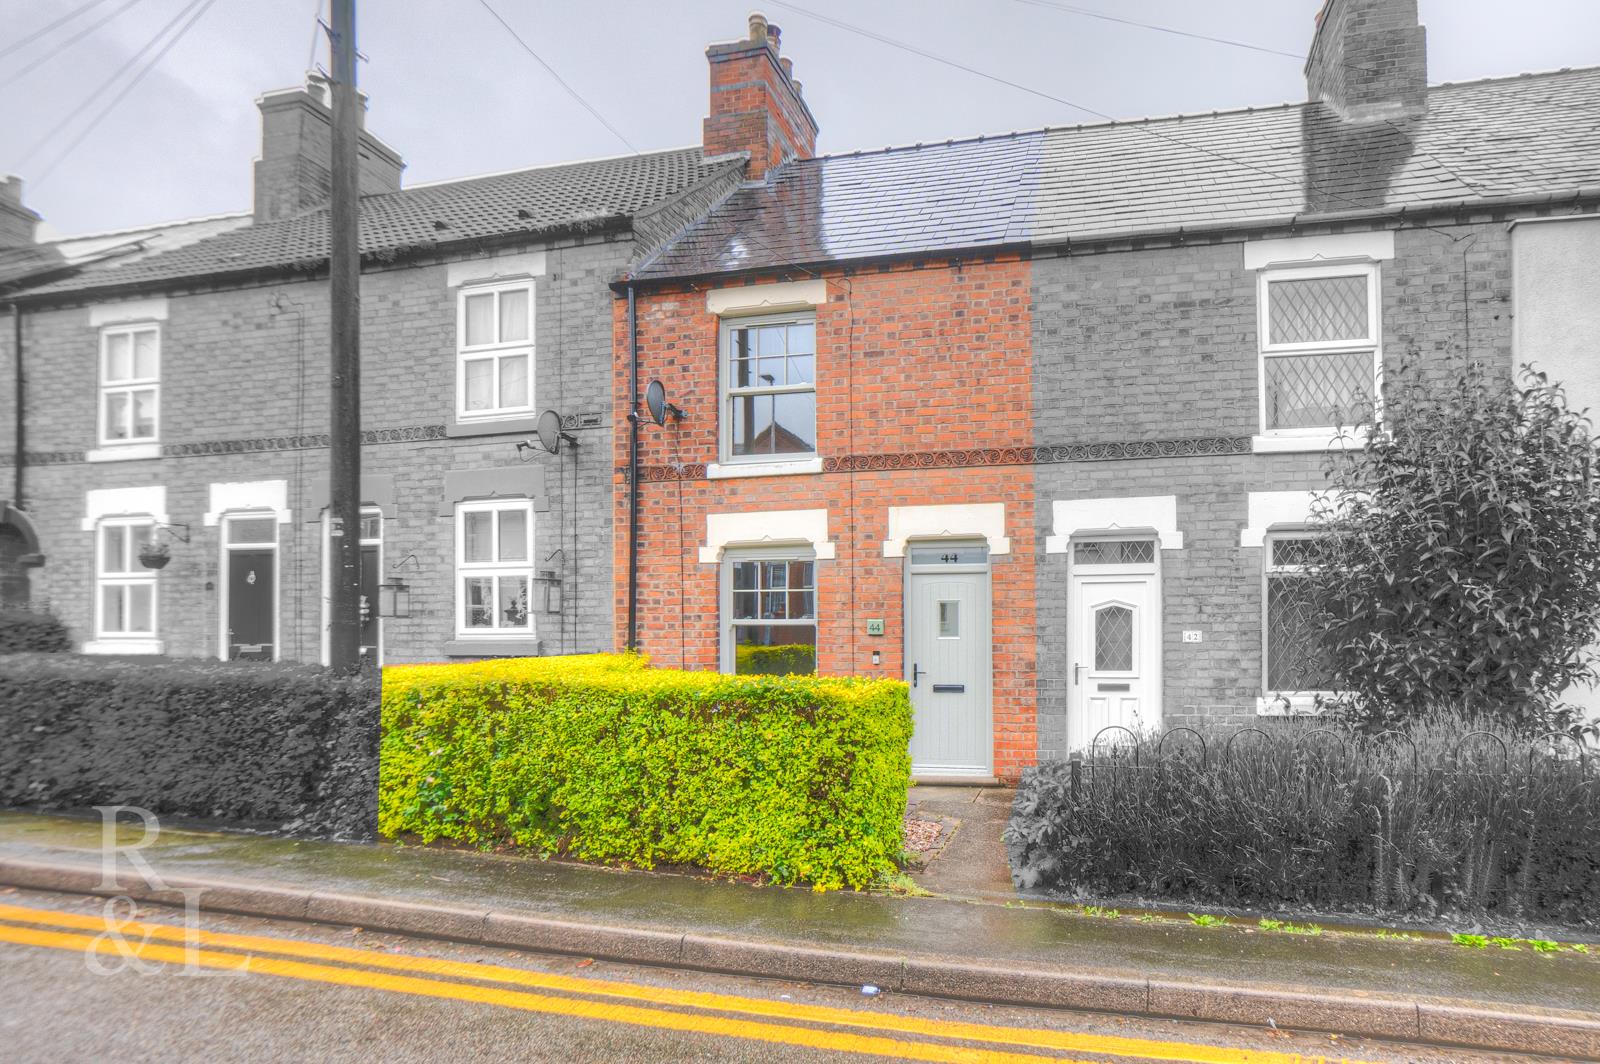 Property image for Moira Road, Donisthorpe